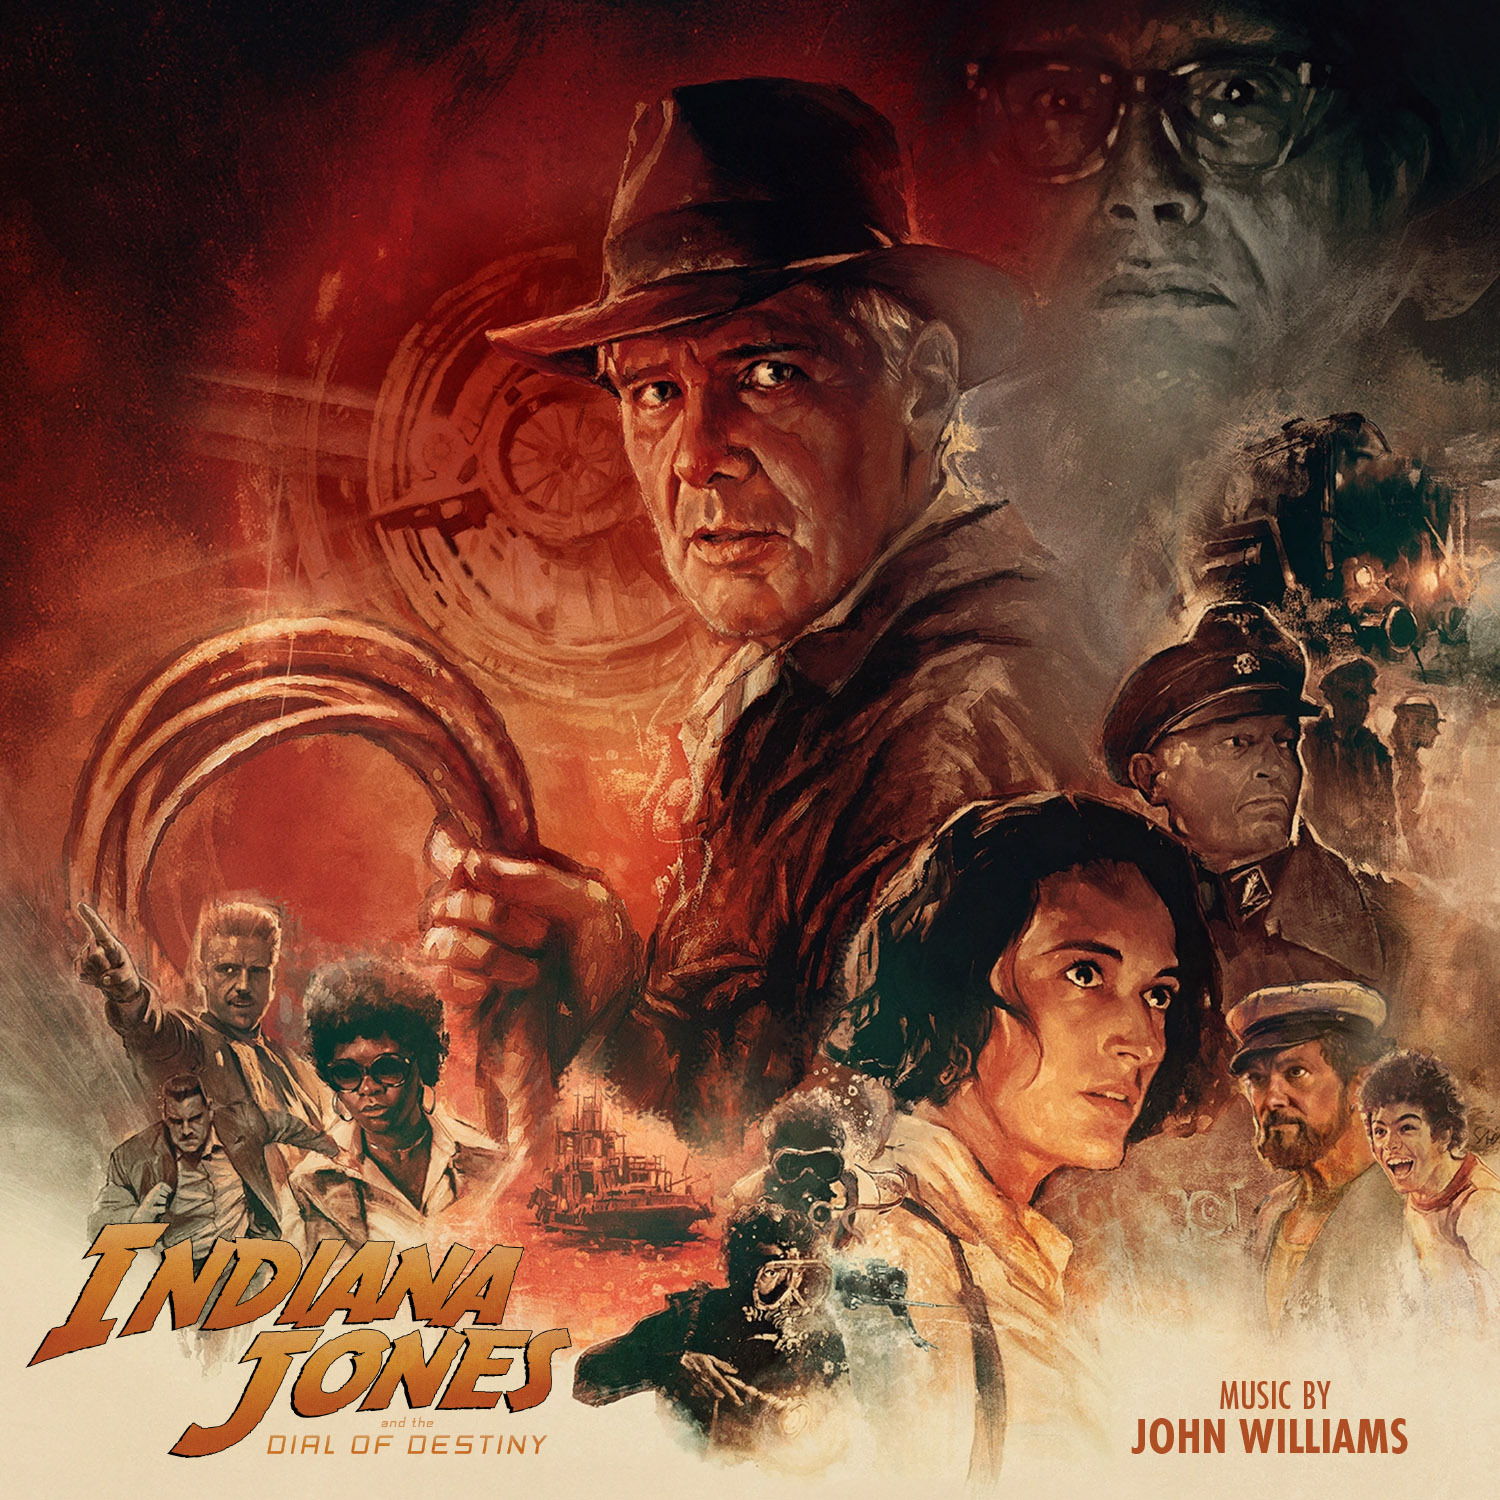 The Hollywood Handle on X: 'INDIANA JONES AND THE DIAL OF DESTINY